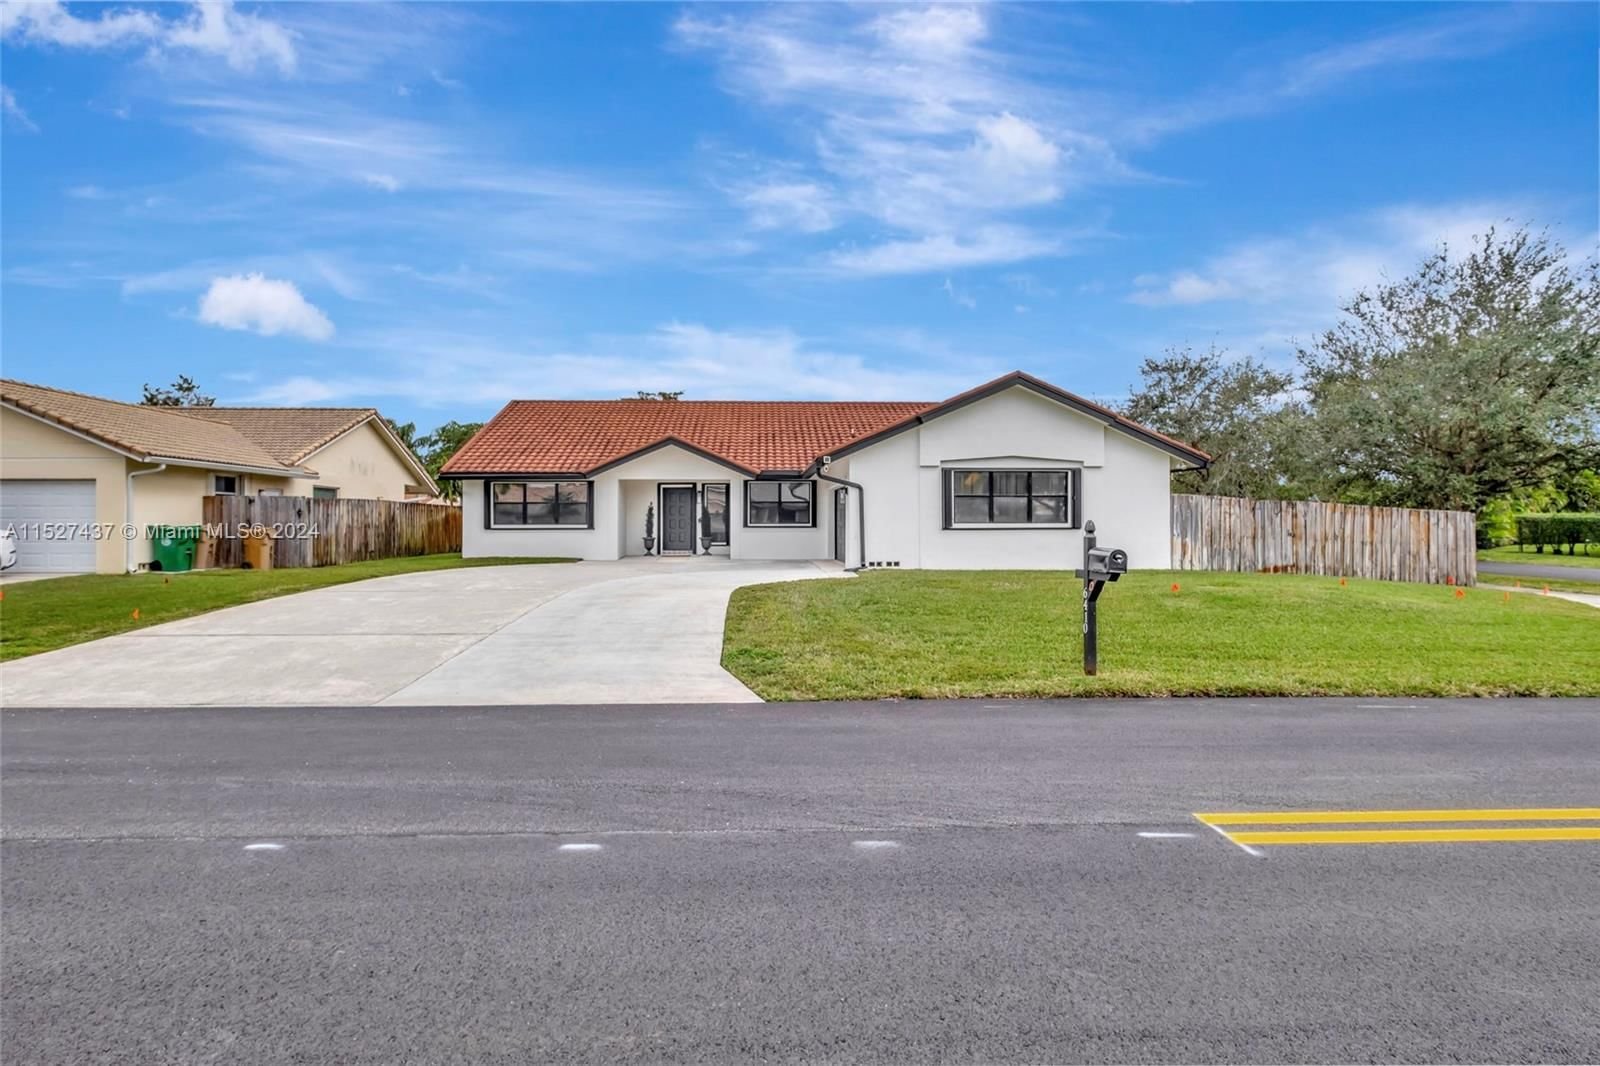 Real estate property located at 6410 Olde Moat Way, Broward County, WAVERLY HUNDRED, Davie, FL